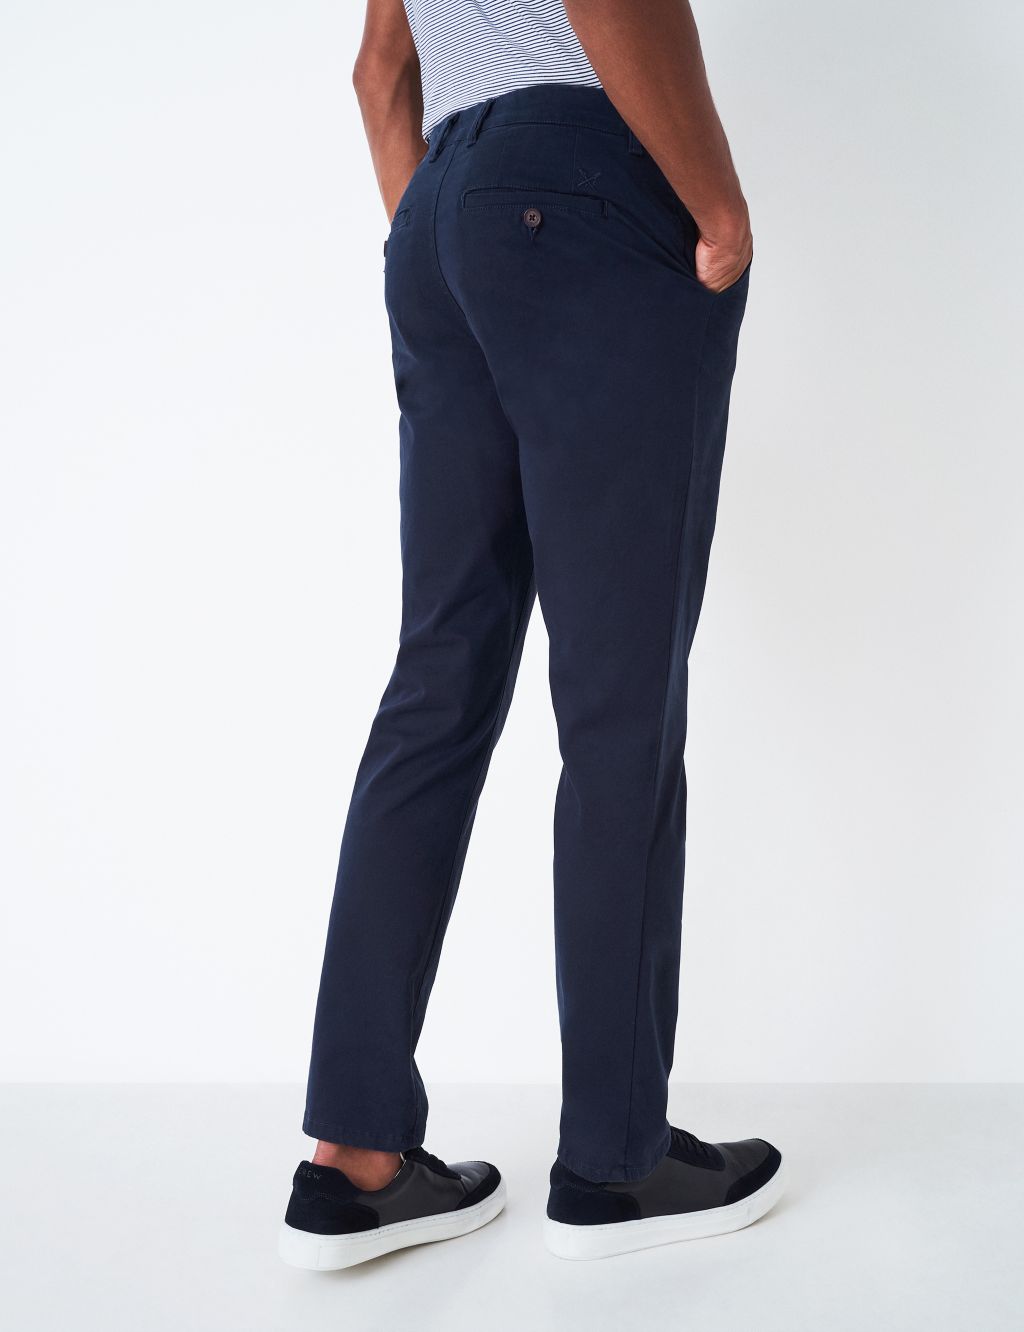 Straight Fit Chinos image 3